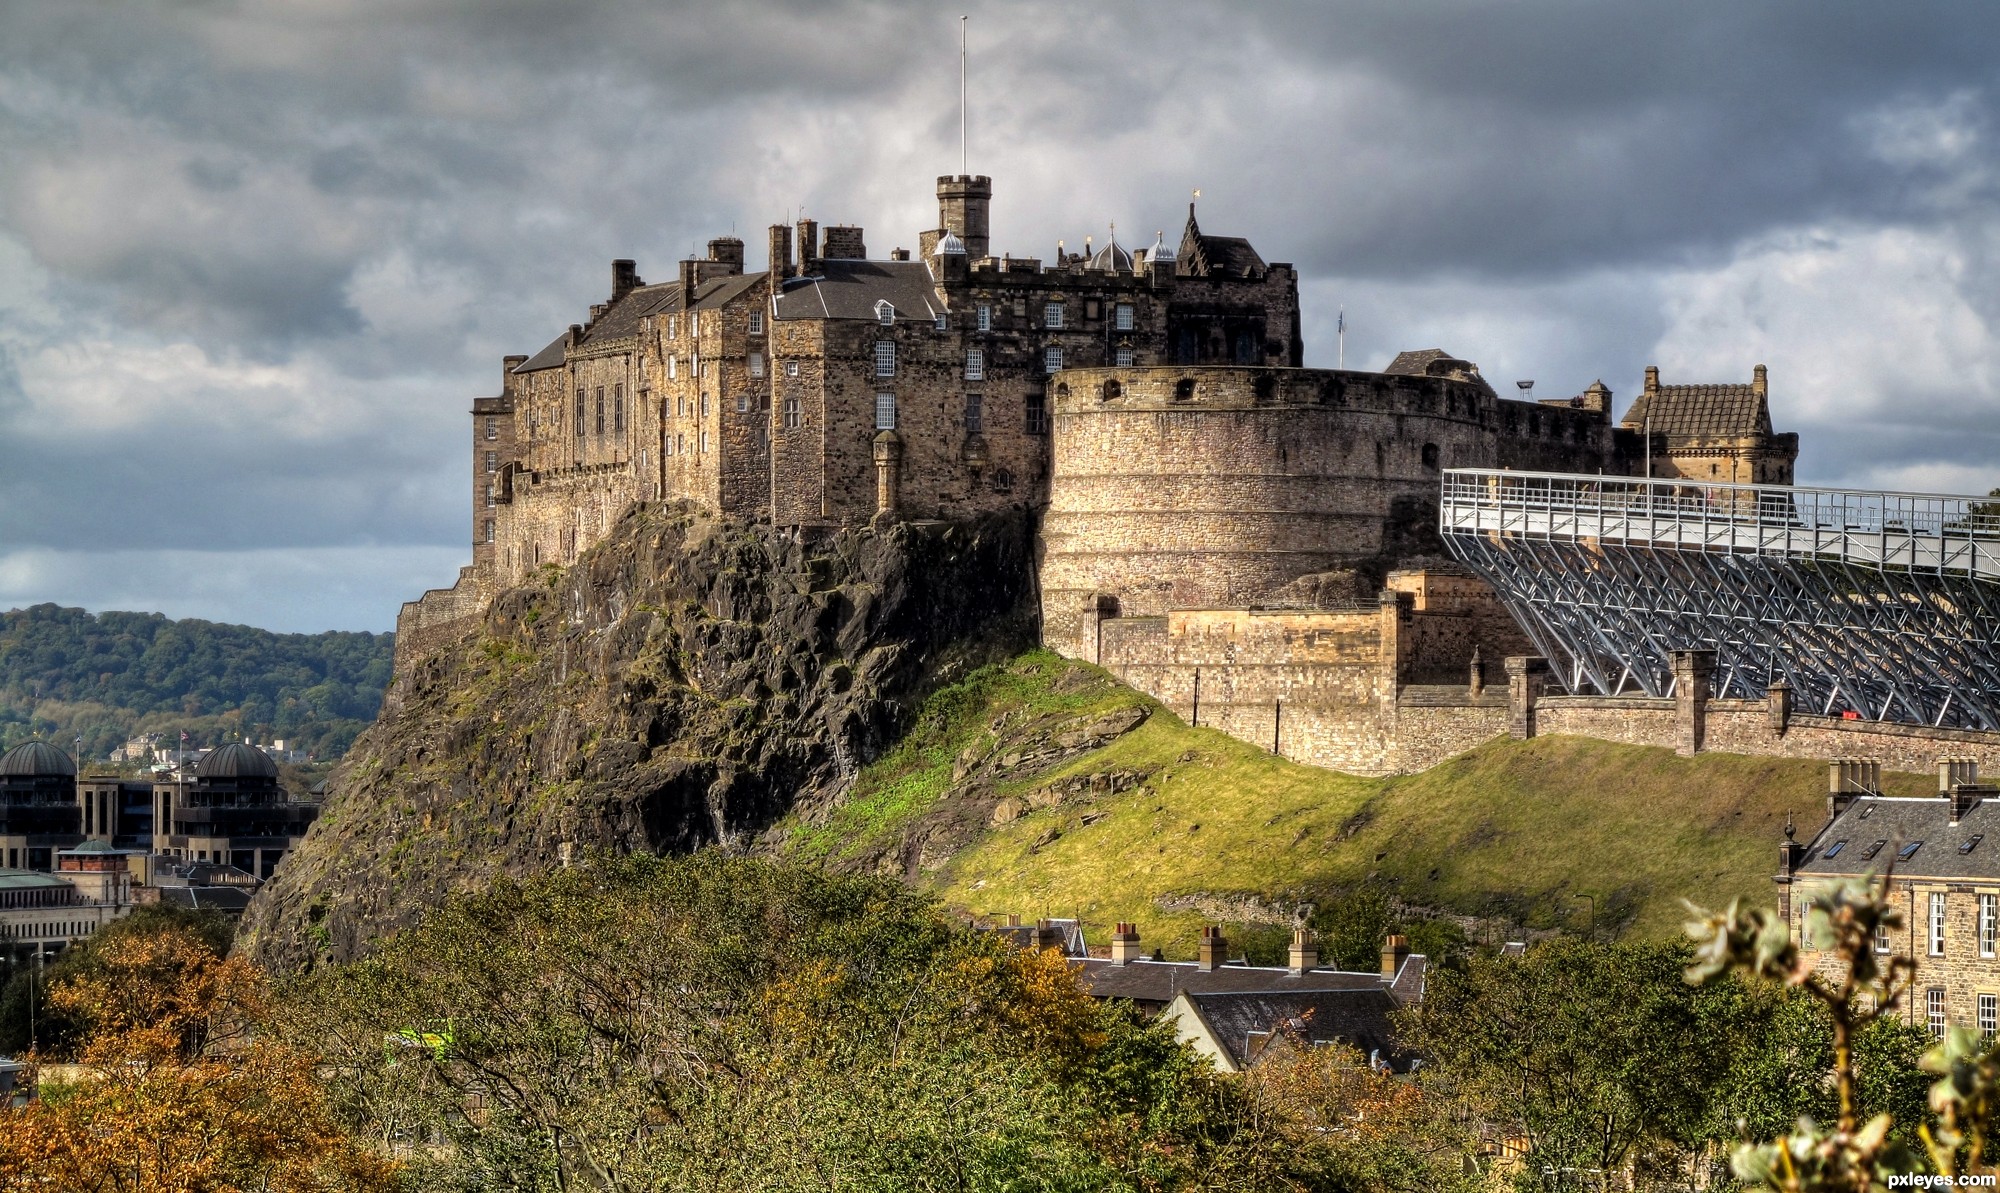 Edinburgh Castle, The Story of A Magnificent and Historic Castle